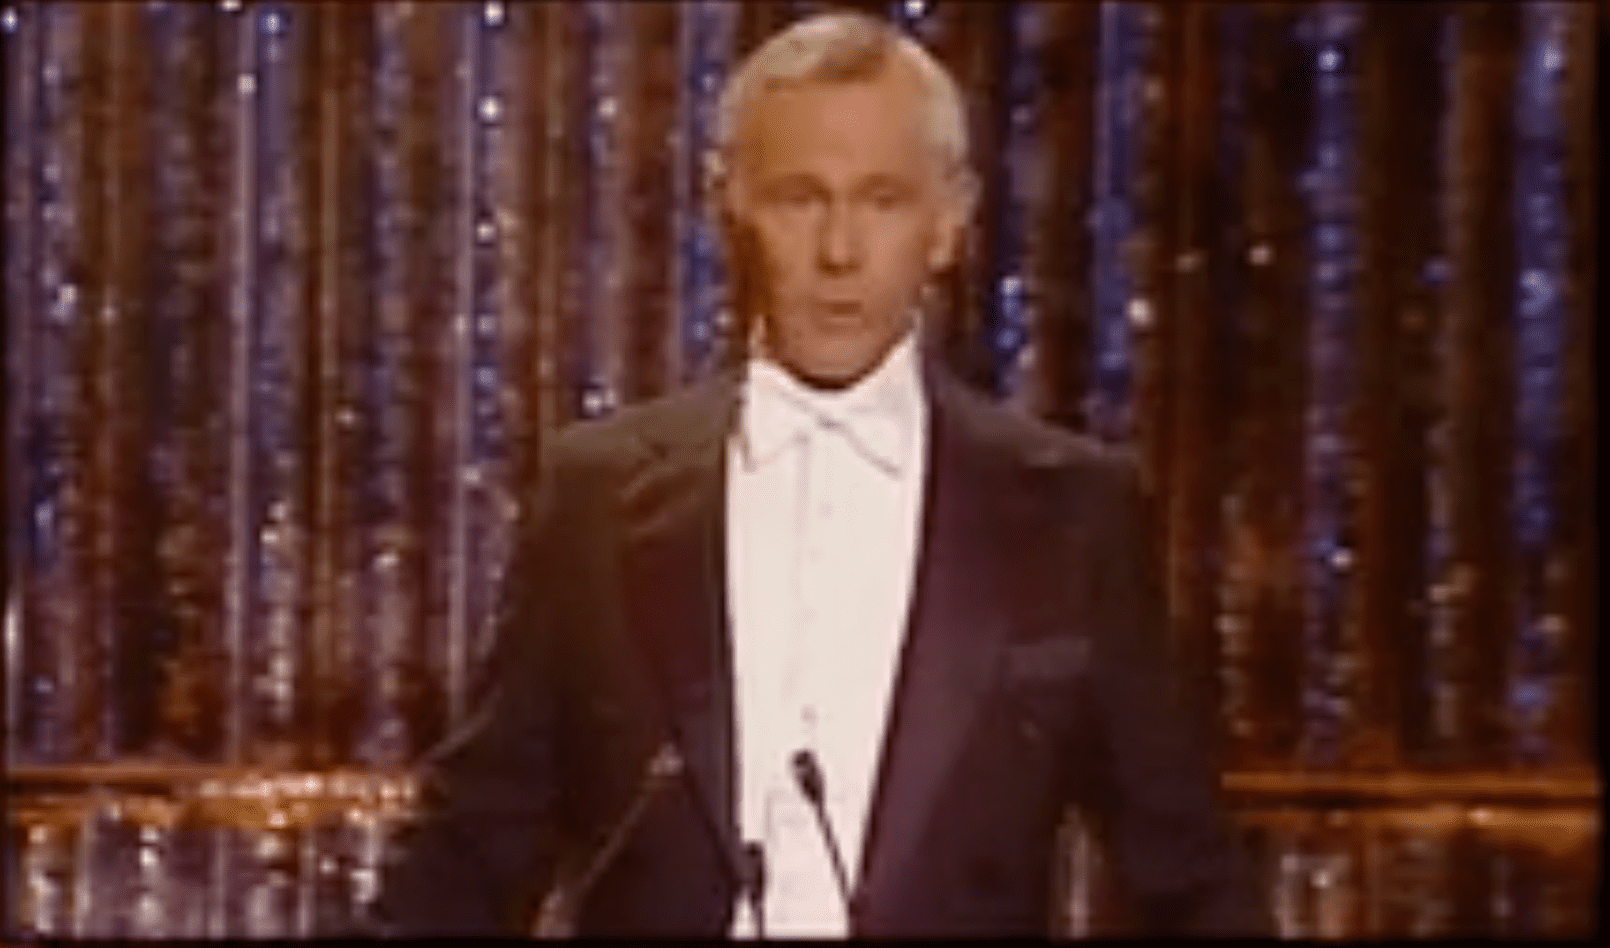 A man in a tuxedo is standing at the podium.